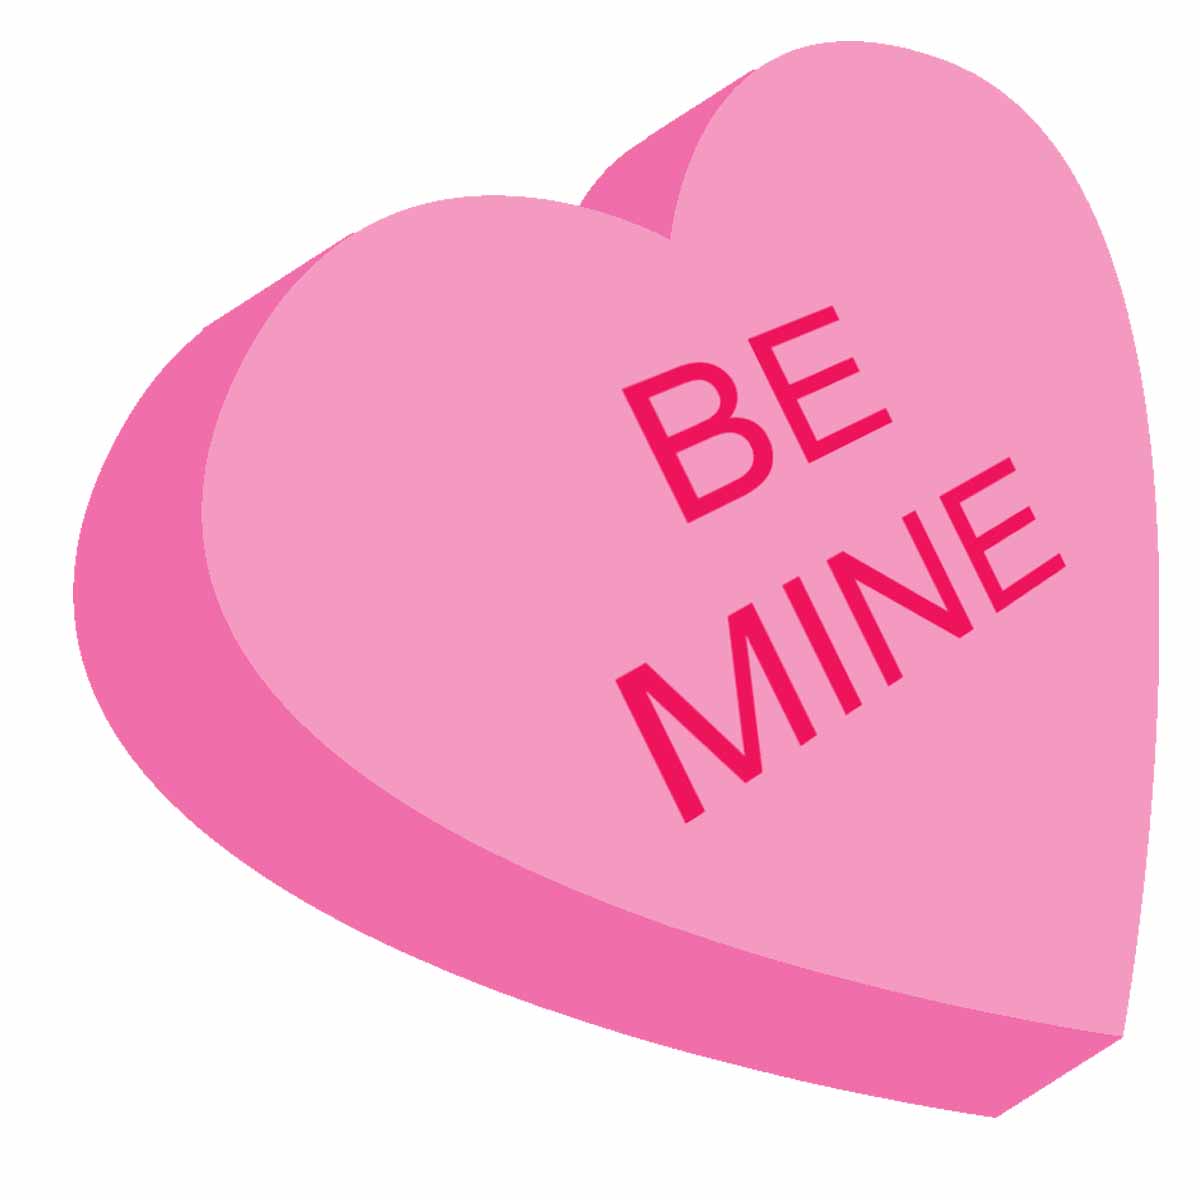 Valentines day clipart for sharing on valentines day 2